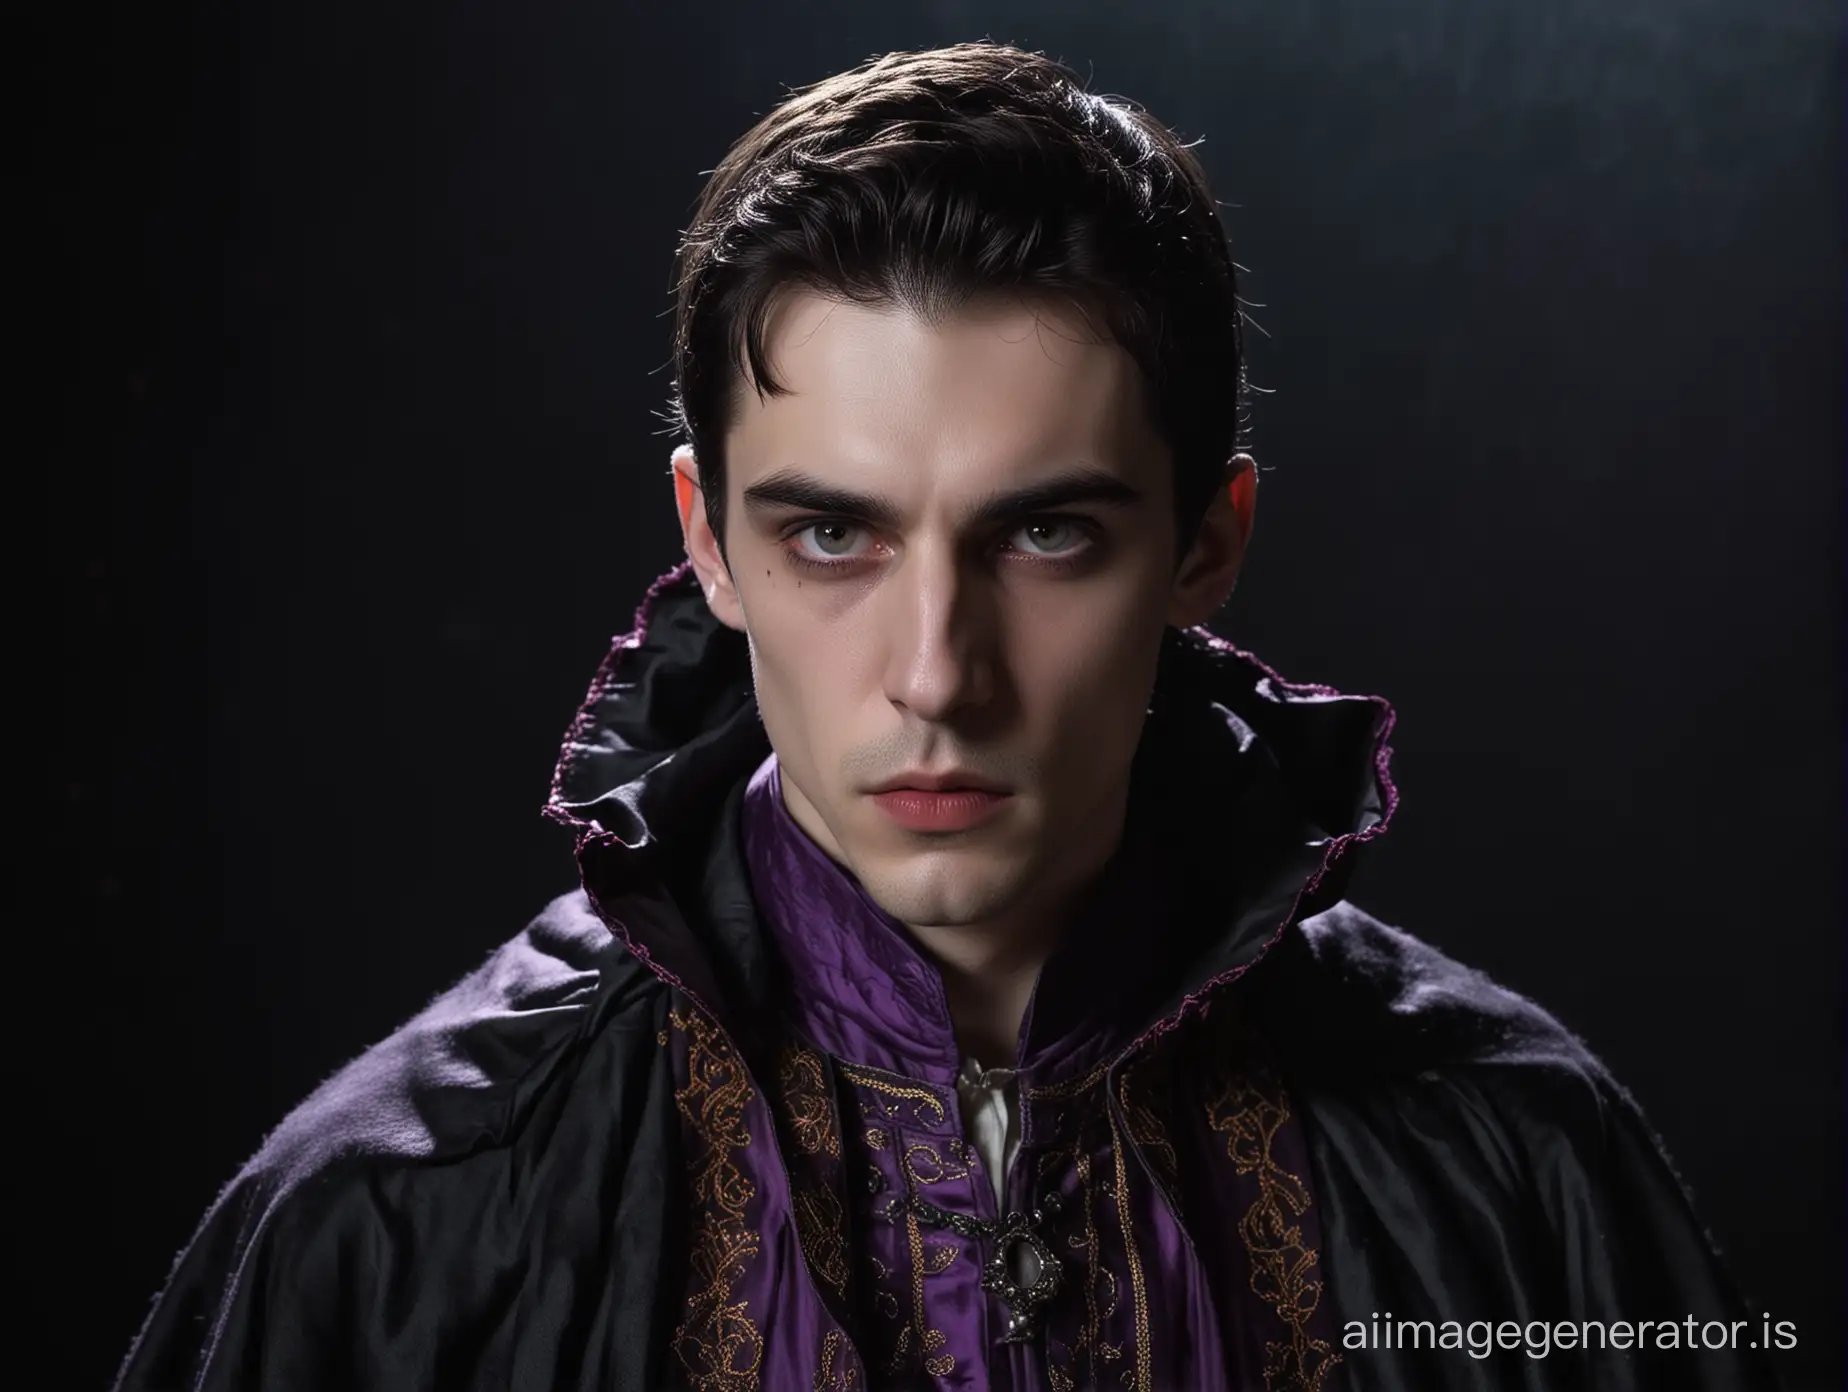 Melancholic-Young-Dracula-Portrait-with-Blood-Stains-and-Red-Eyes